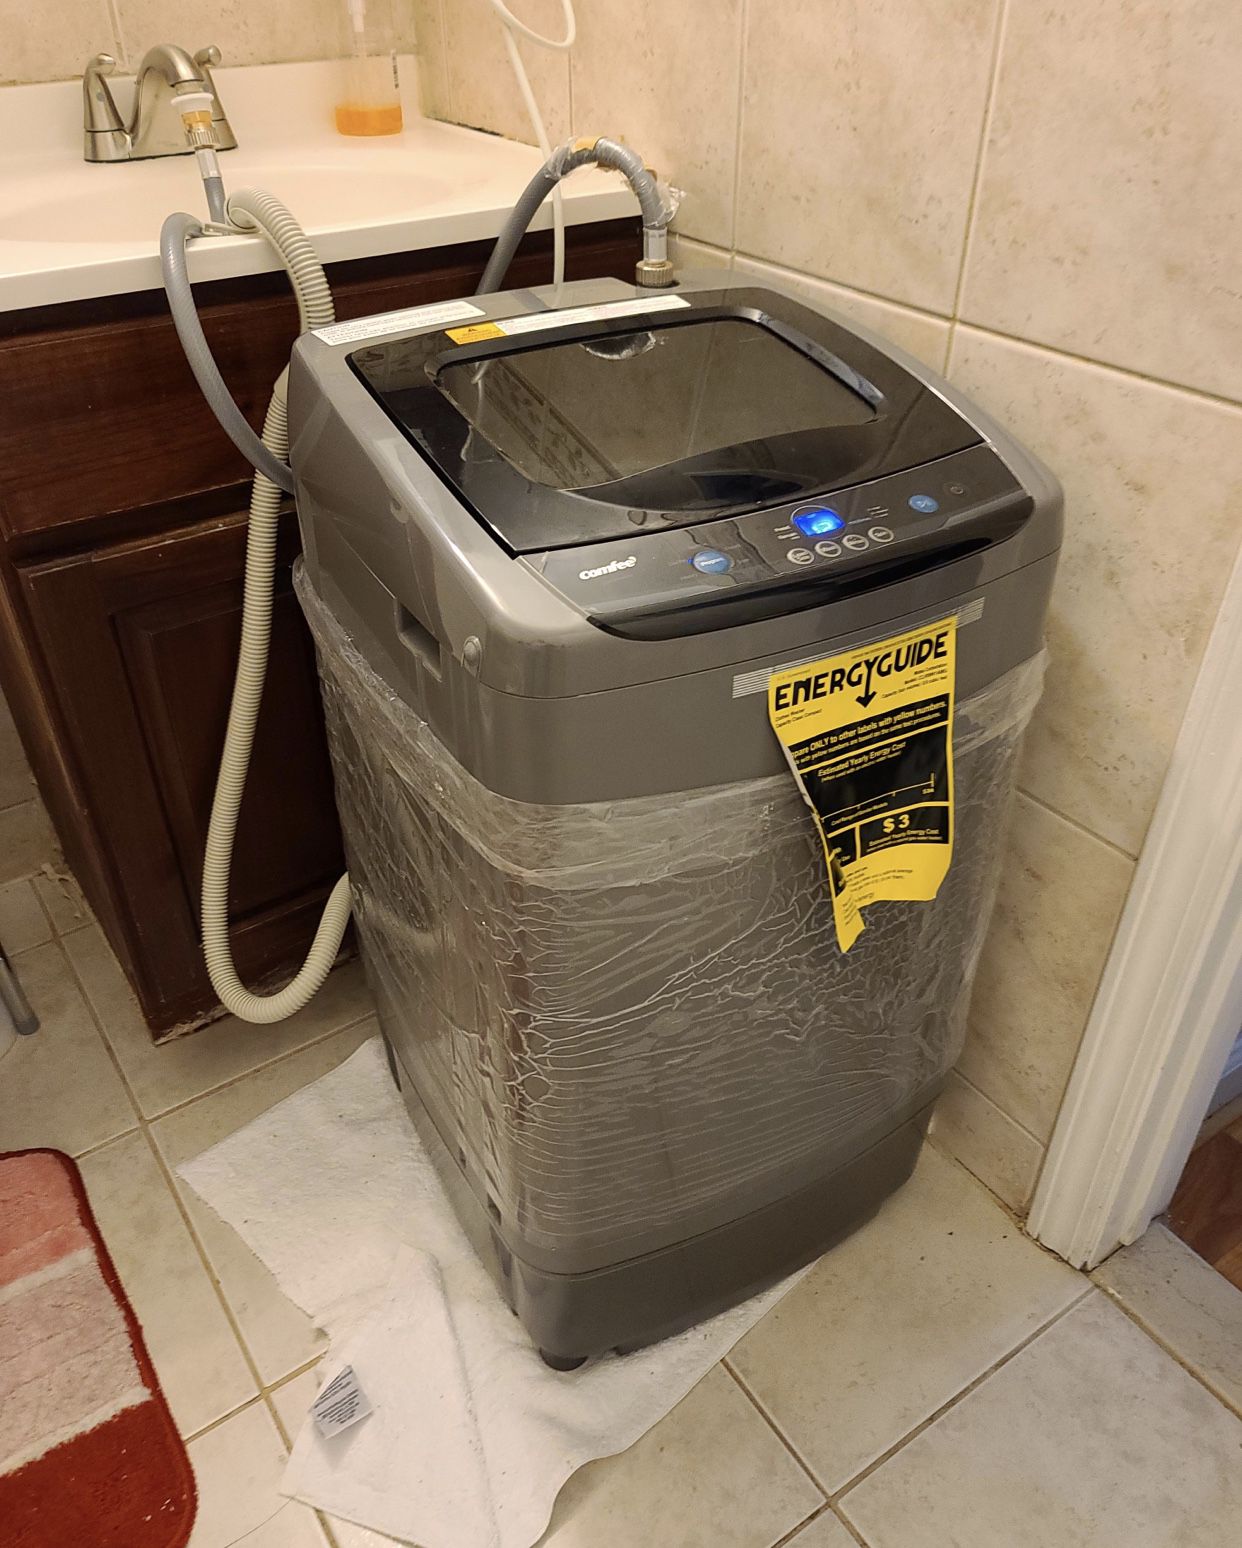 Comfee Portable Washing Machine (NEED TO MOVE SO GETTING RID ASAP) for Sale  in The Bronx, NY - OfferUp